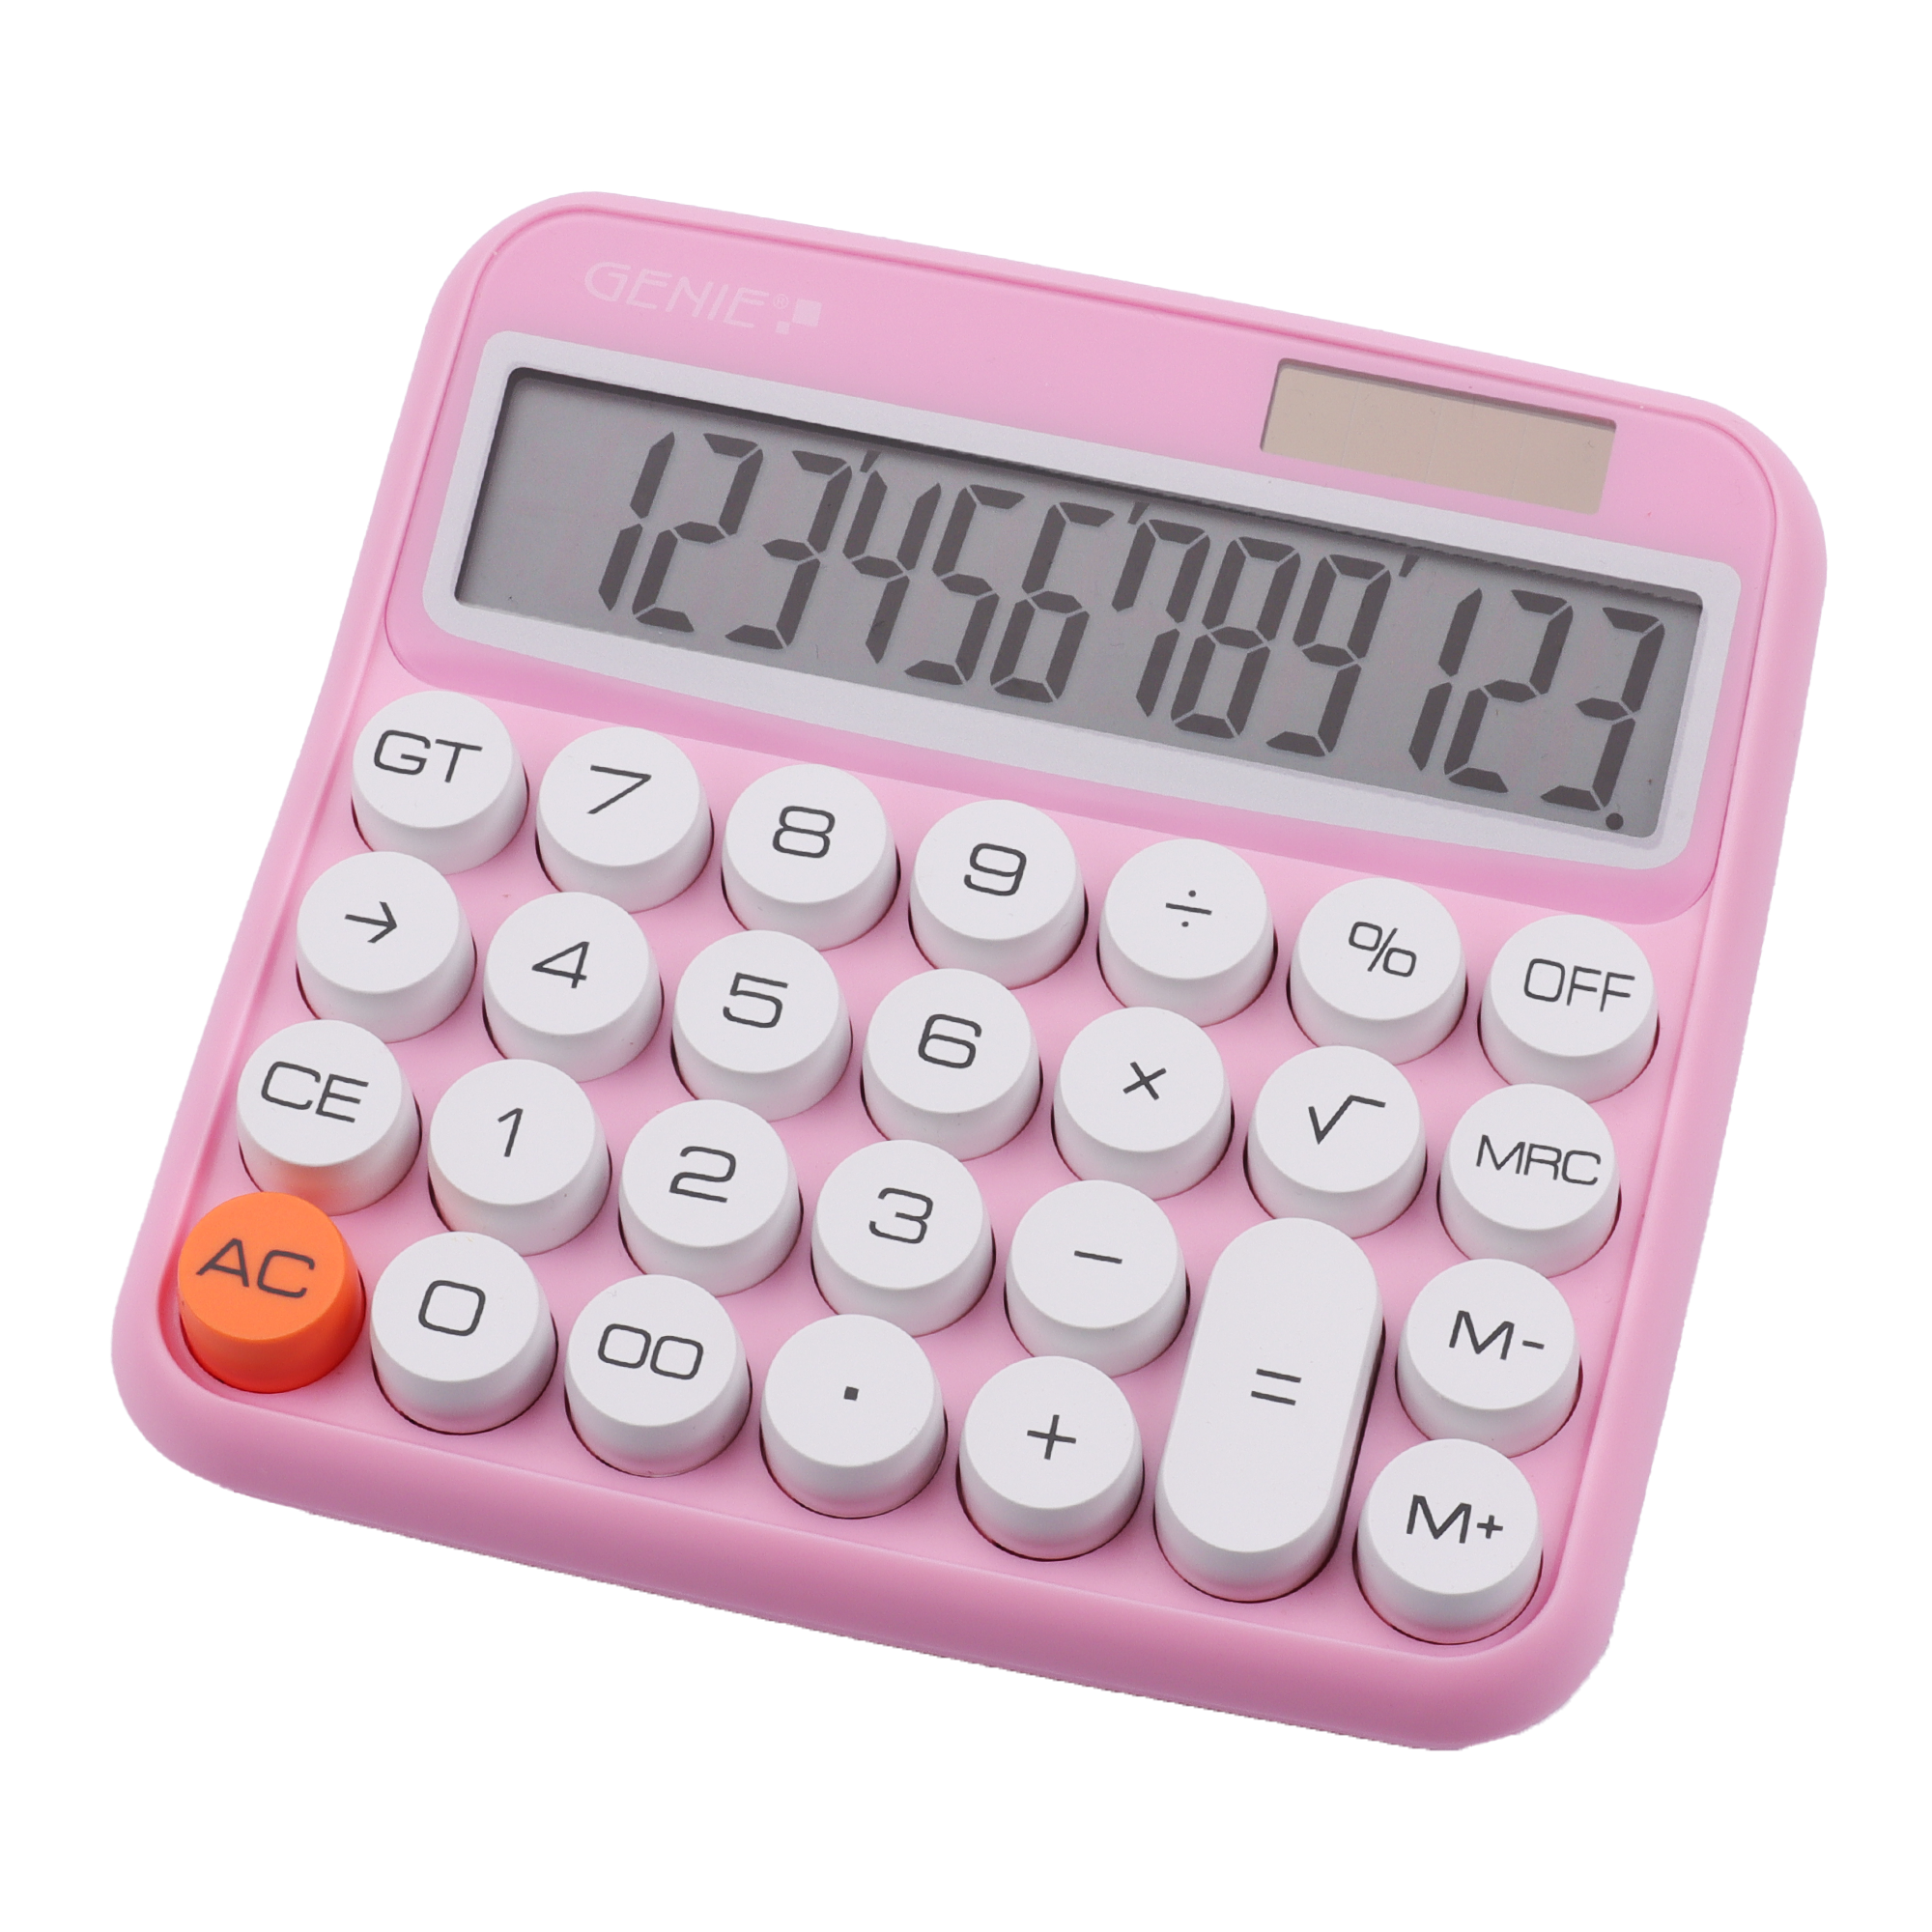 12-digit desktop calculator with dual power (solar and battery), pink